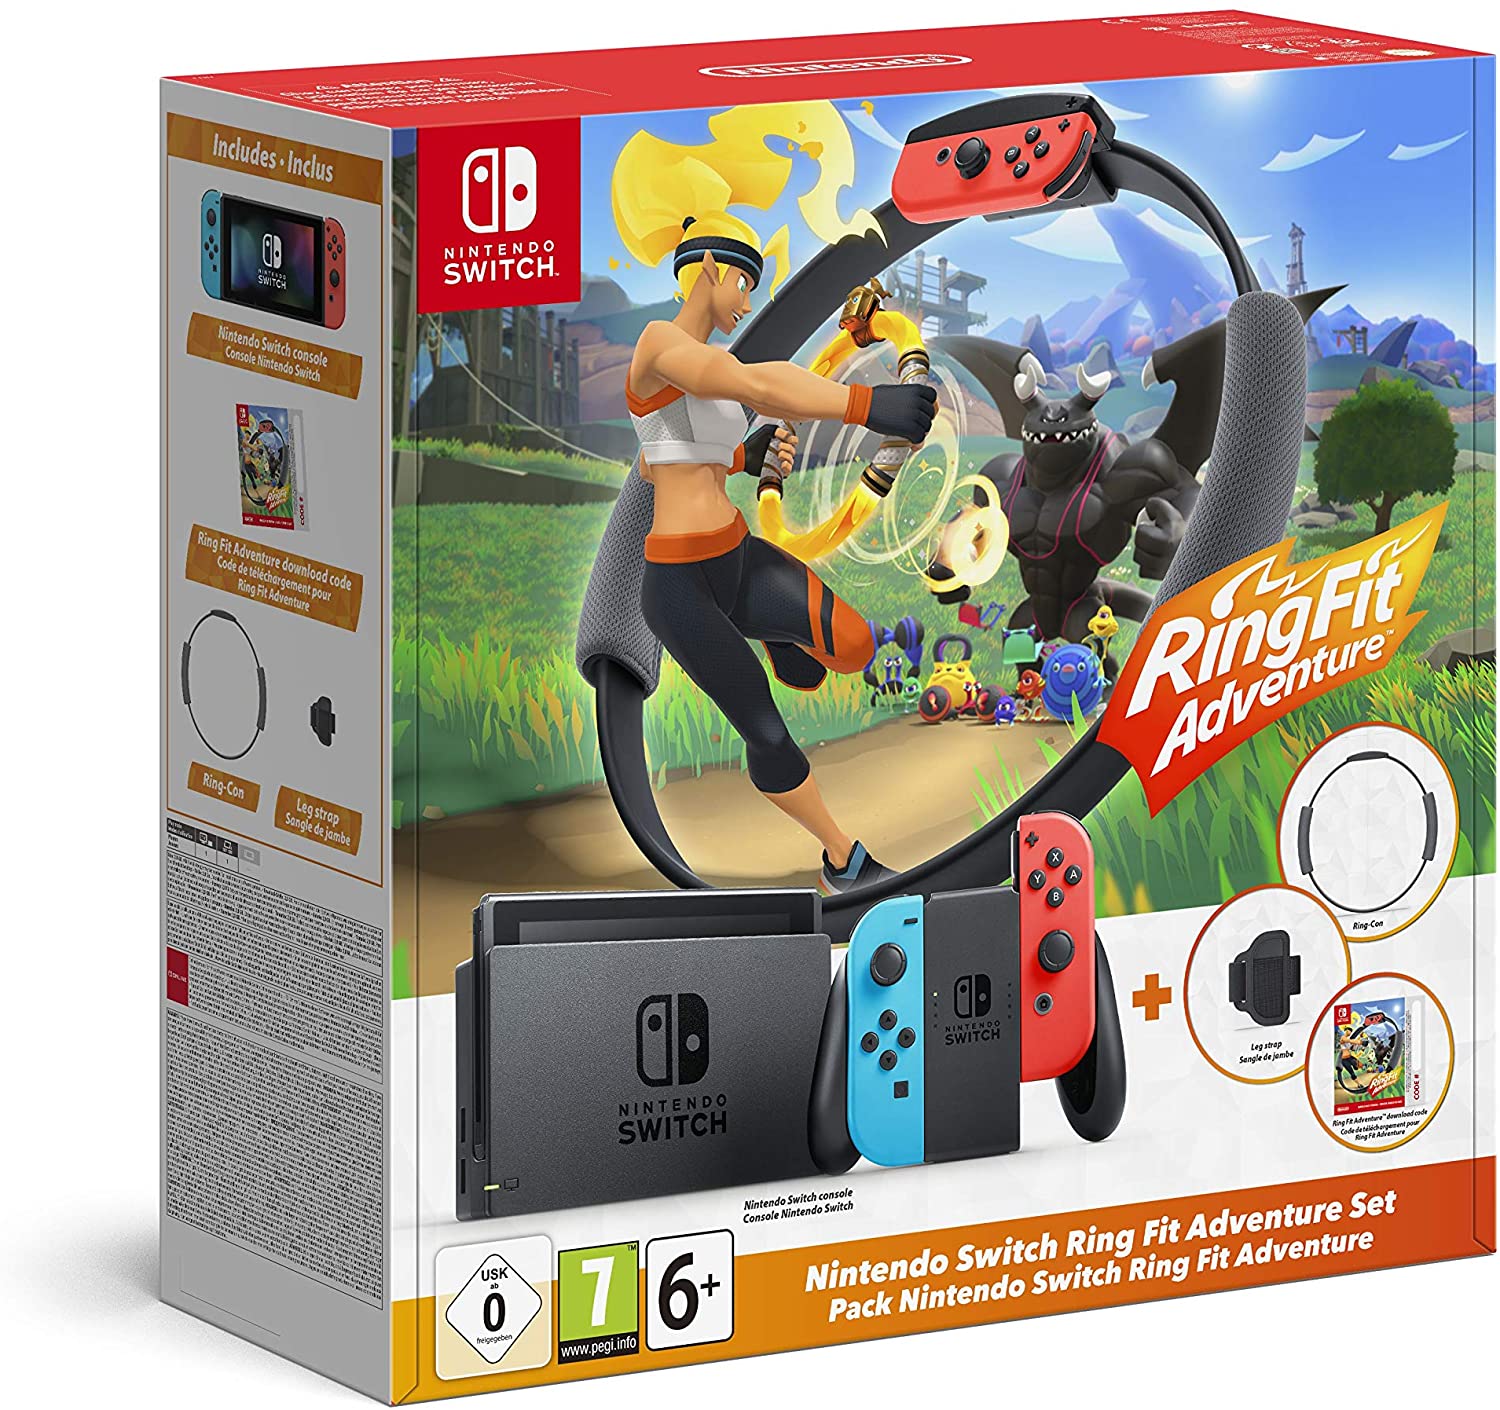 CONSOLA NINTENDO SWITCH NEON + RING FIT ADVENTURE 